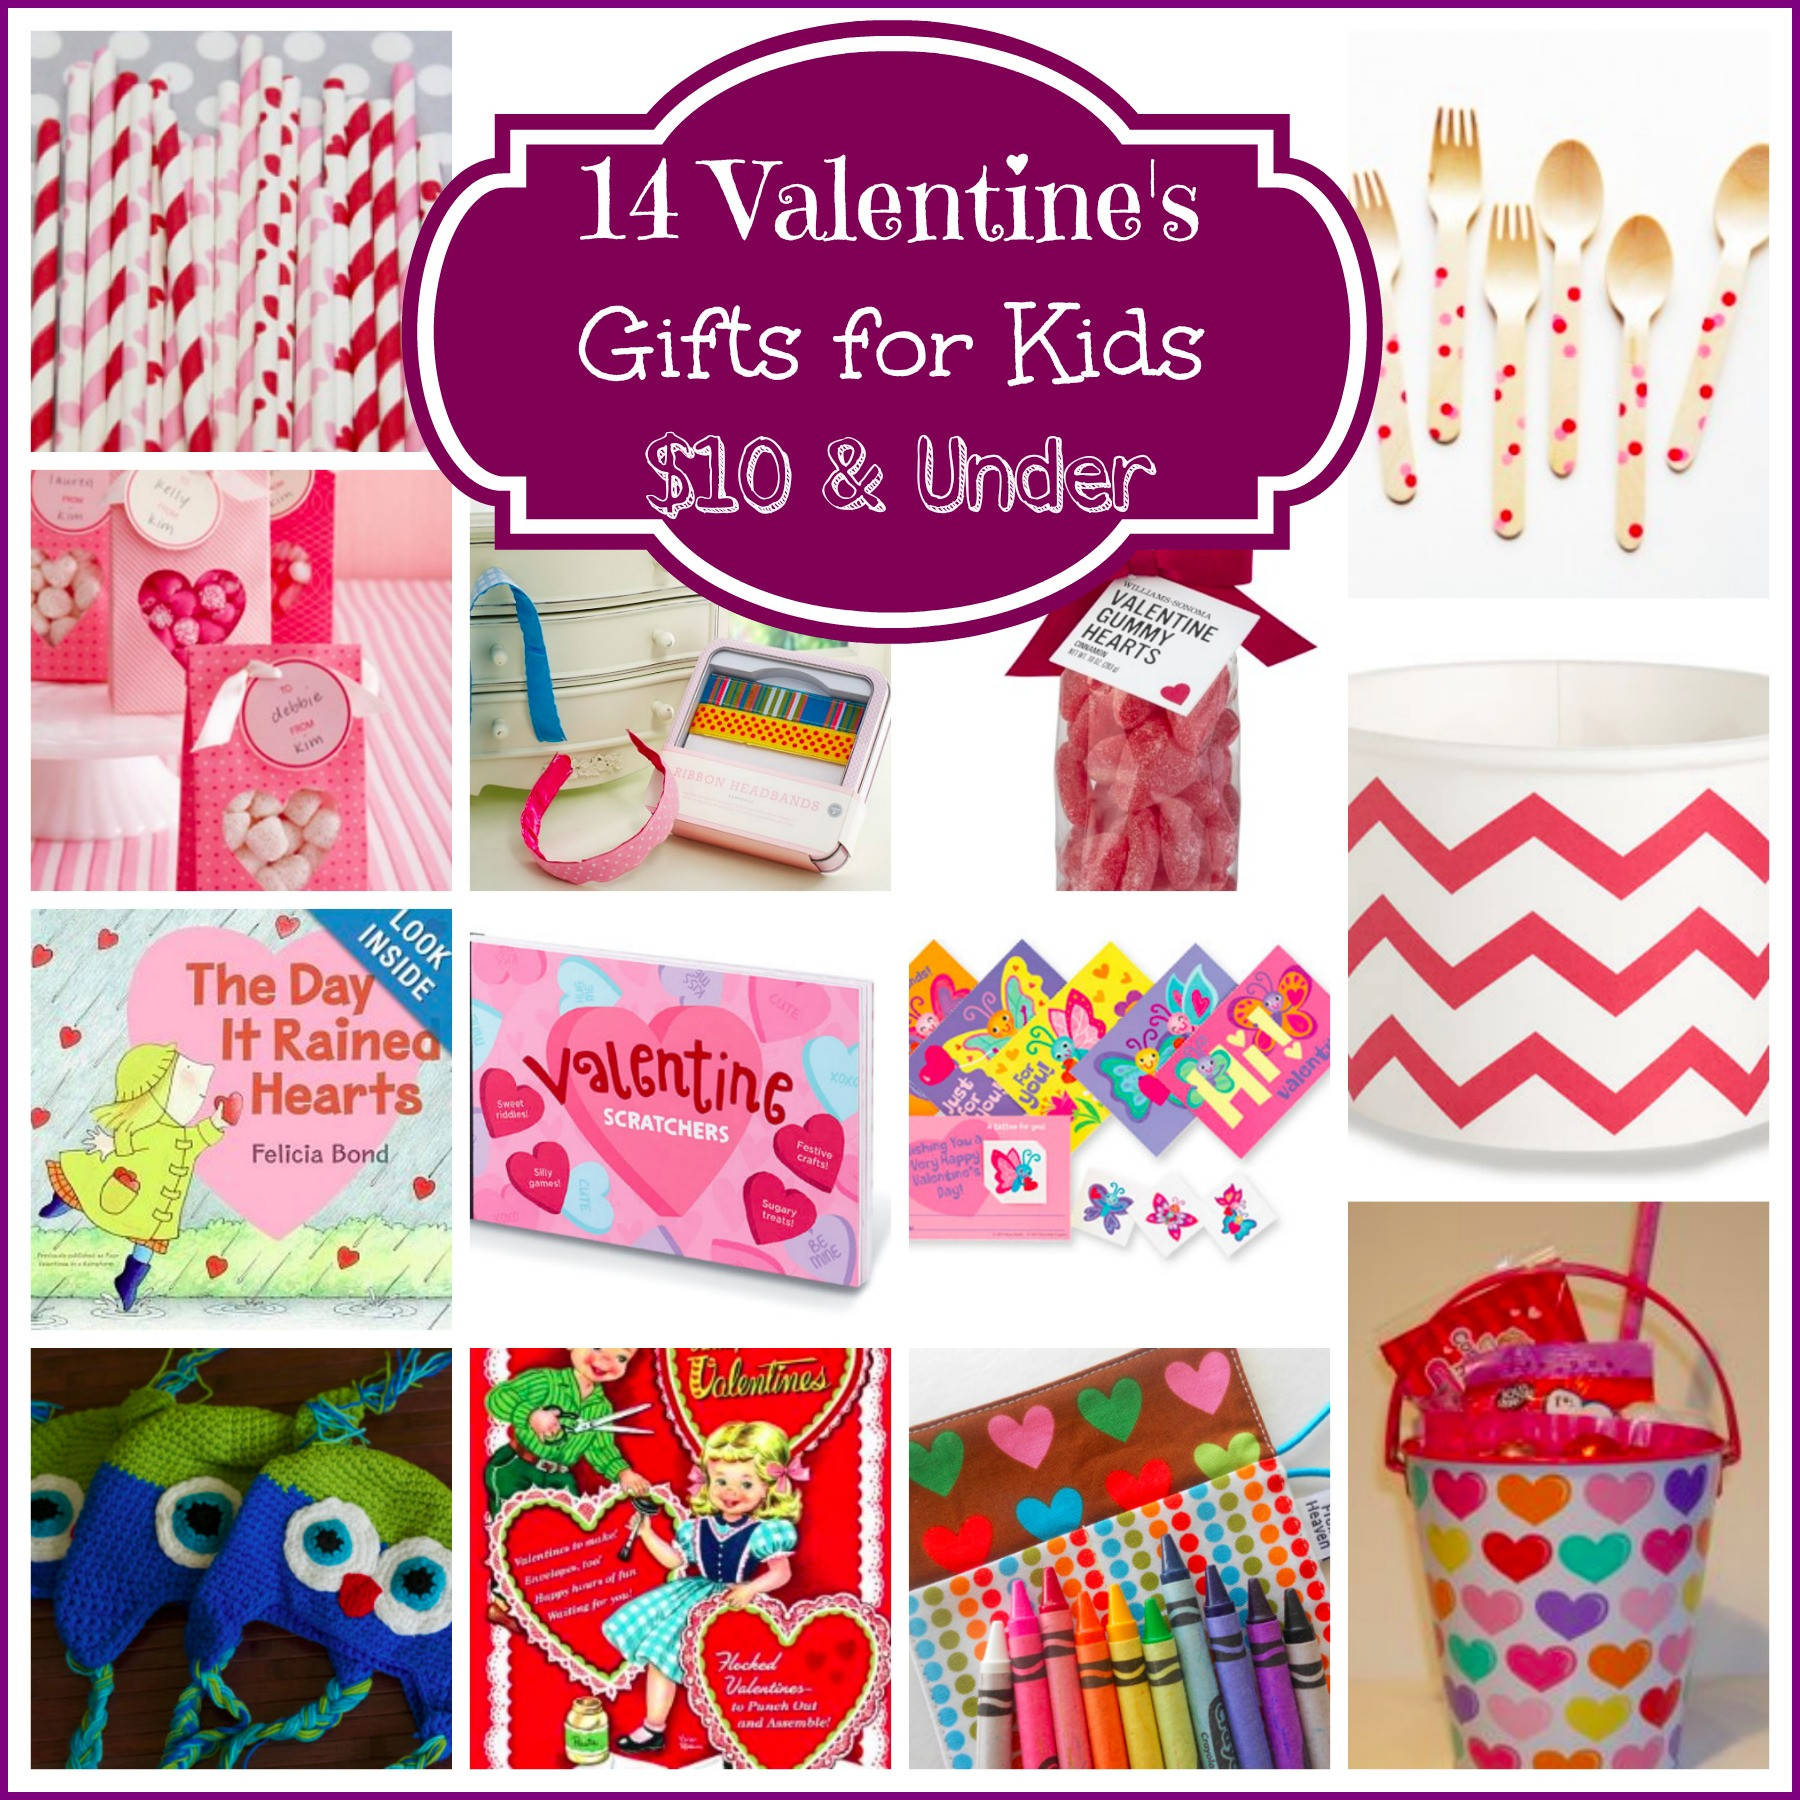 Valentine Gifts For Kids
 14 Valentine’s Day Gifts for Kids $10 & Under